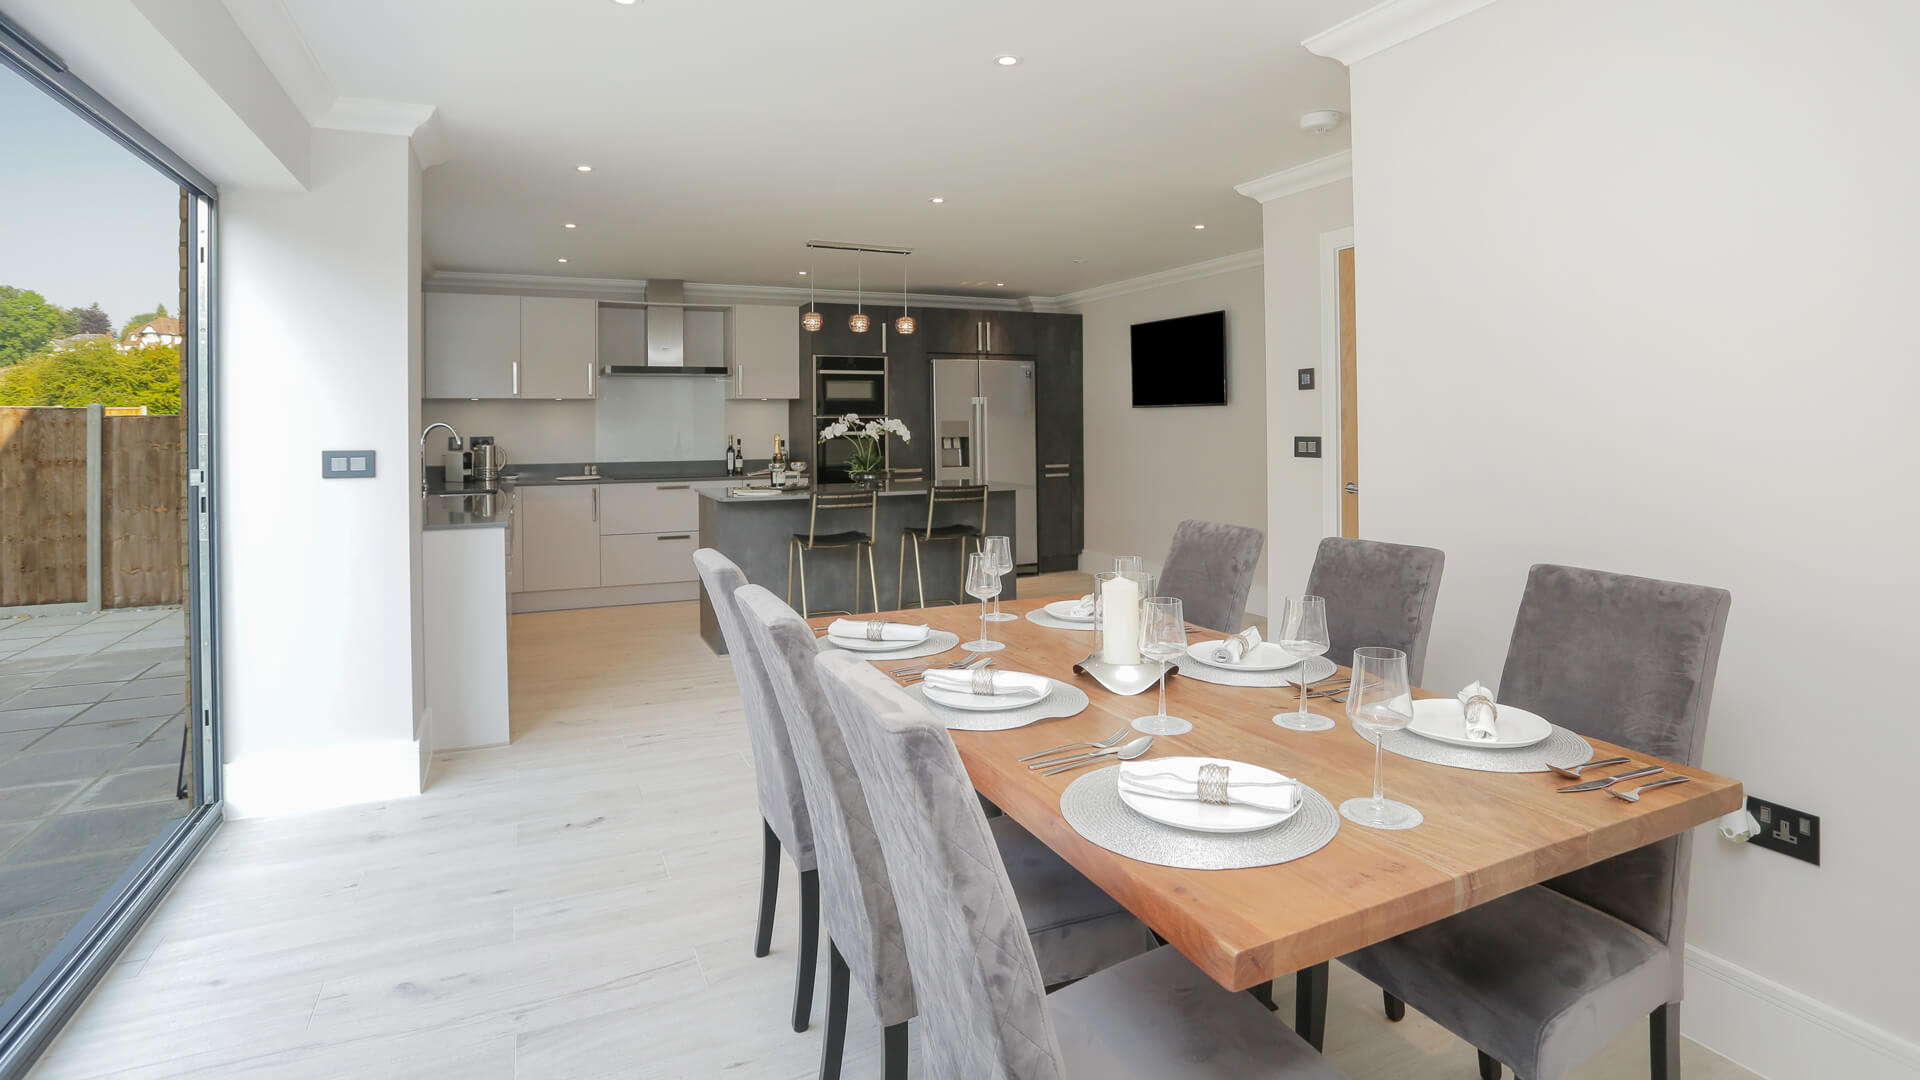 Kitchen diner with dining table at Woodside court Plot 2